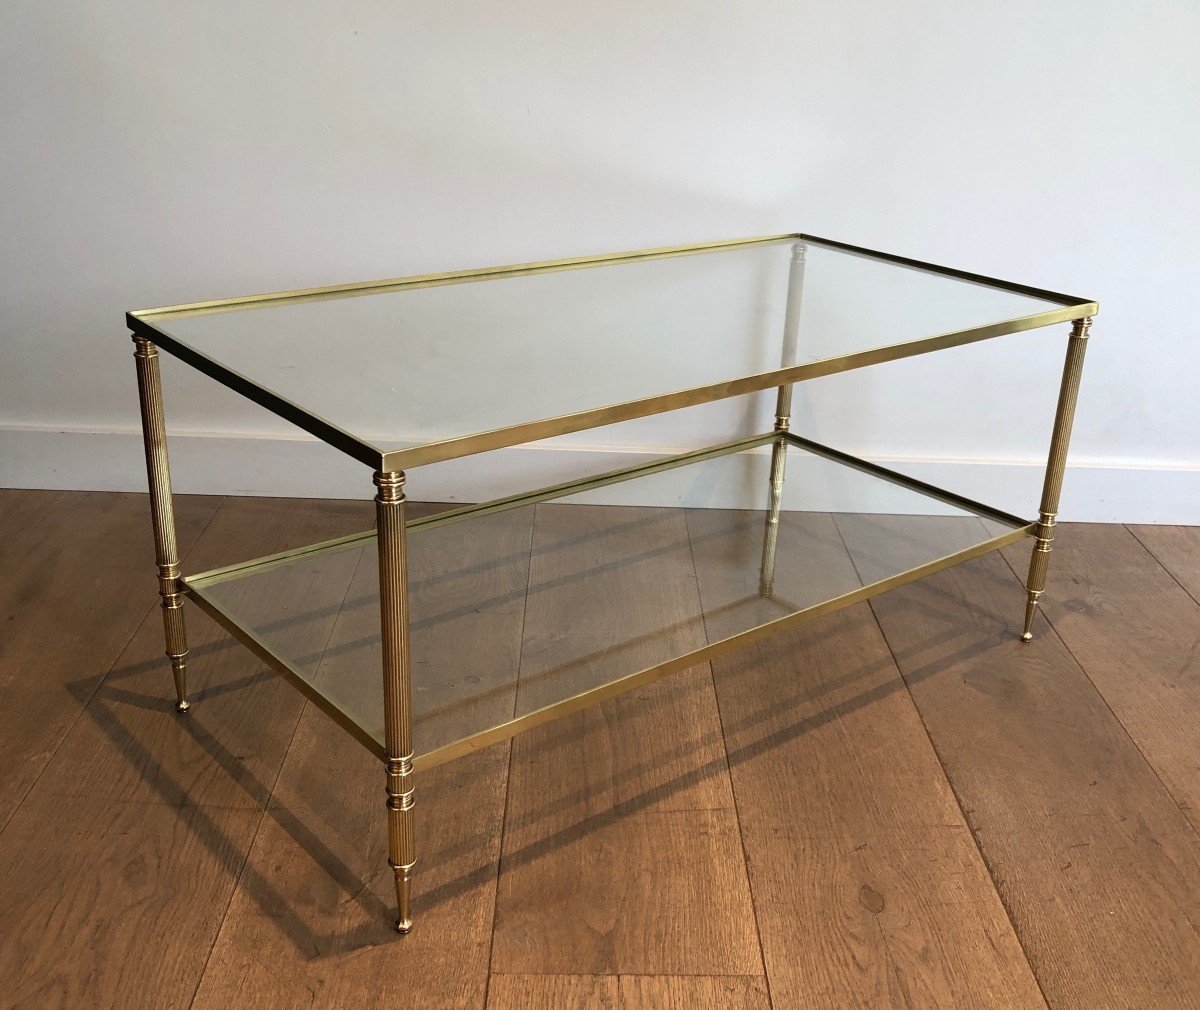 Brass Rectangular Neoclassical Style Coffee Table. French Work In The Style Of Maison Jansen. 